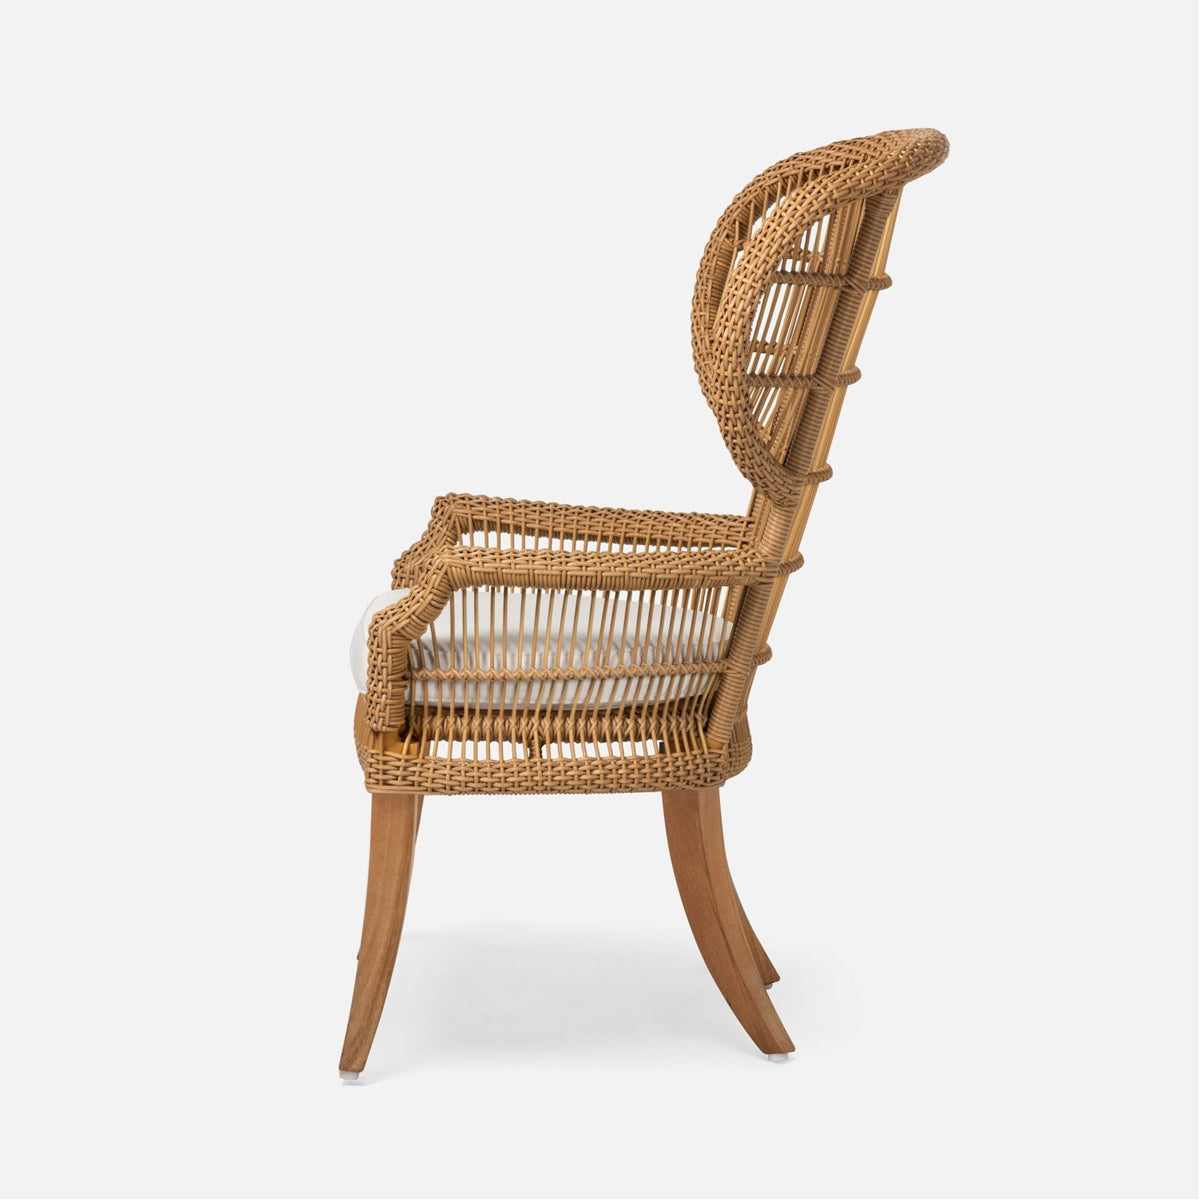 Made Goods Aurora Woven Wingback Outdoor Dining Chair in Garonne Leather